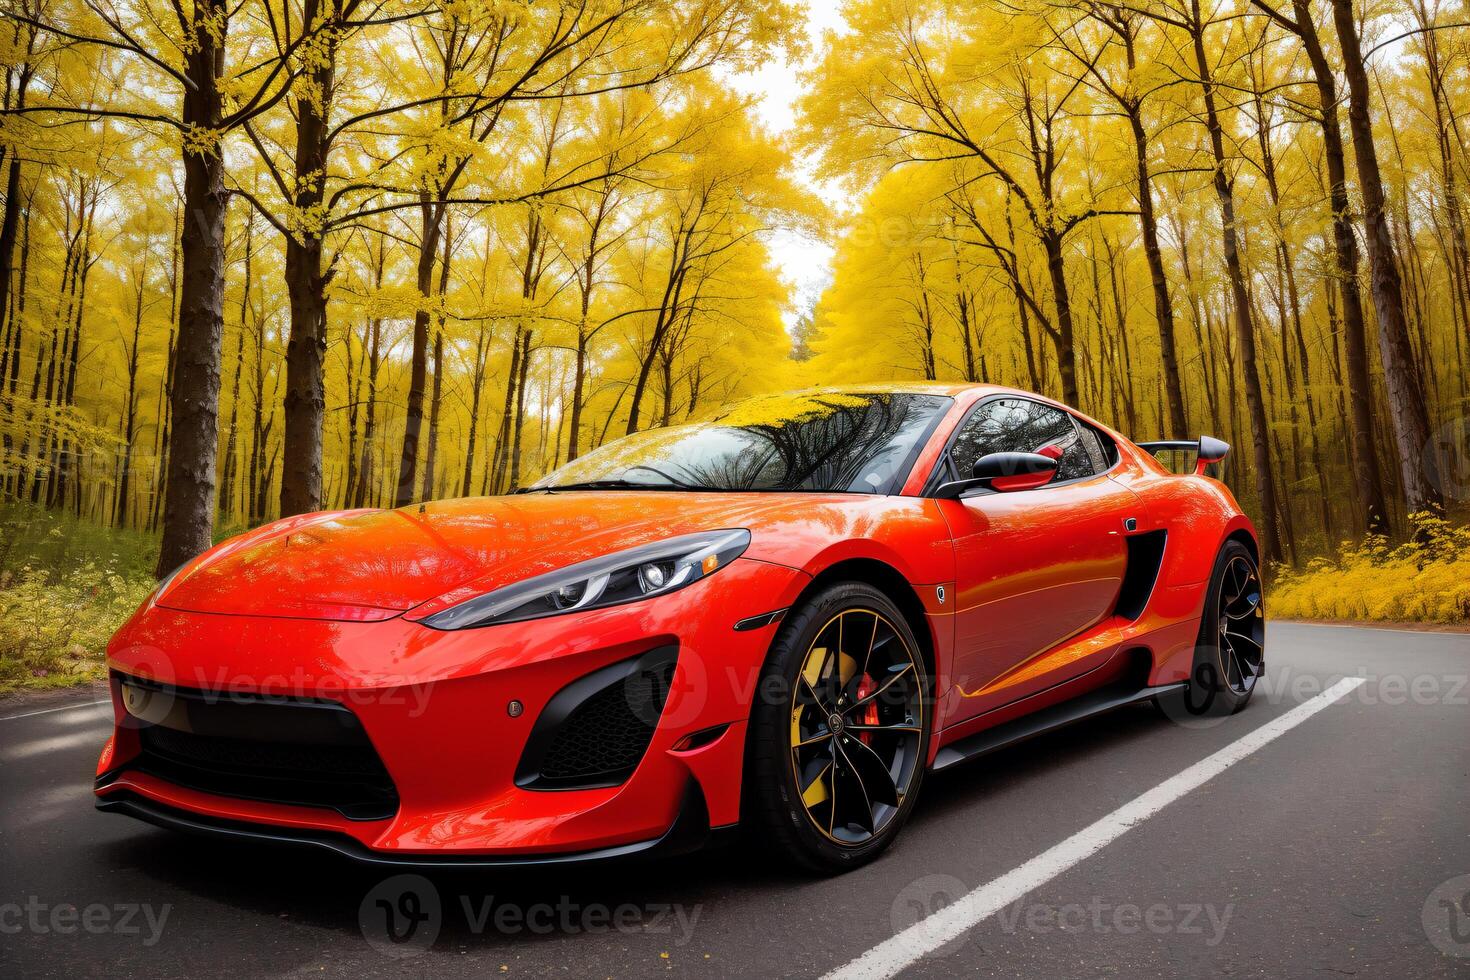 A red sports car drives along a road in a forest with trees in the background, yellow autumn trees. photo